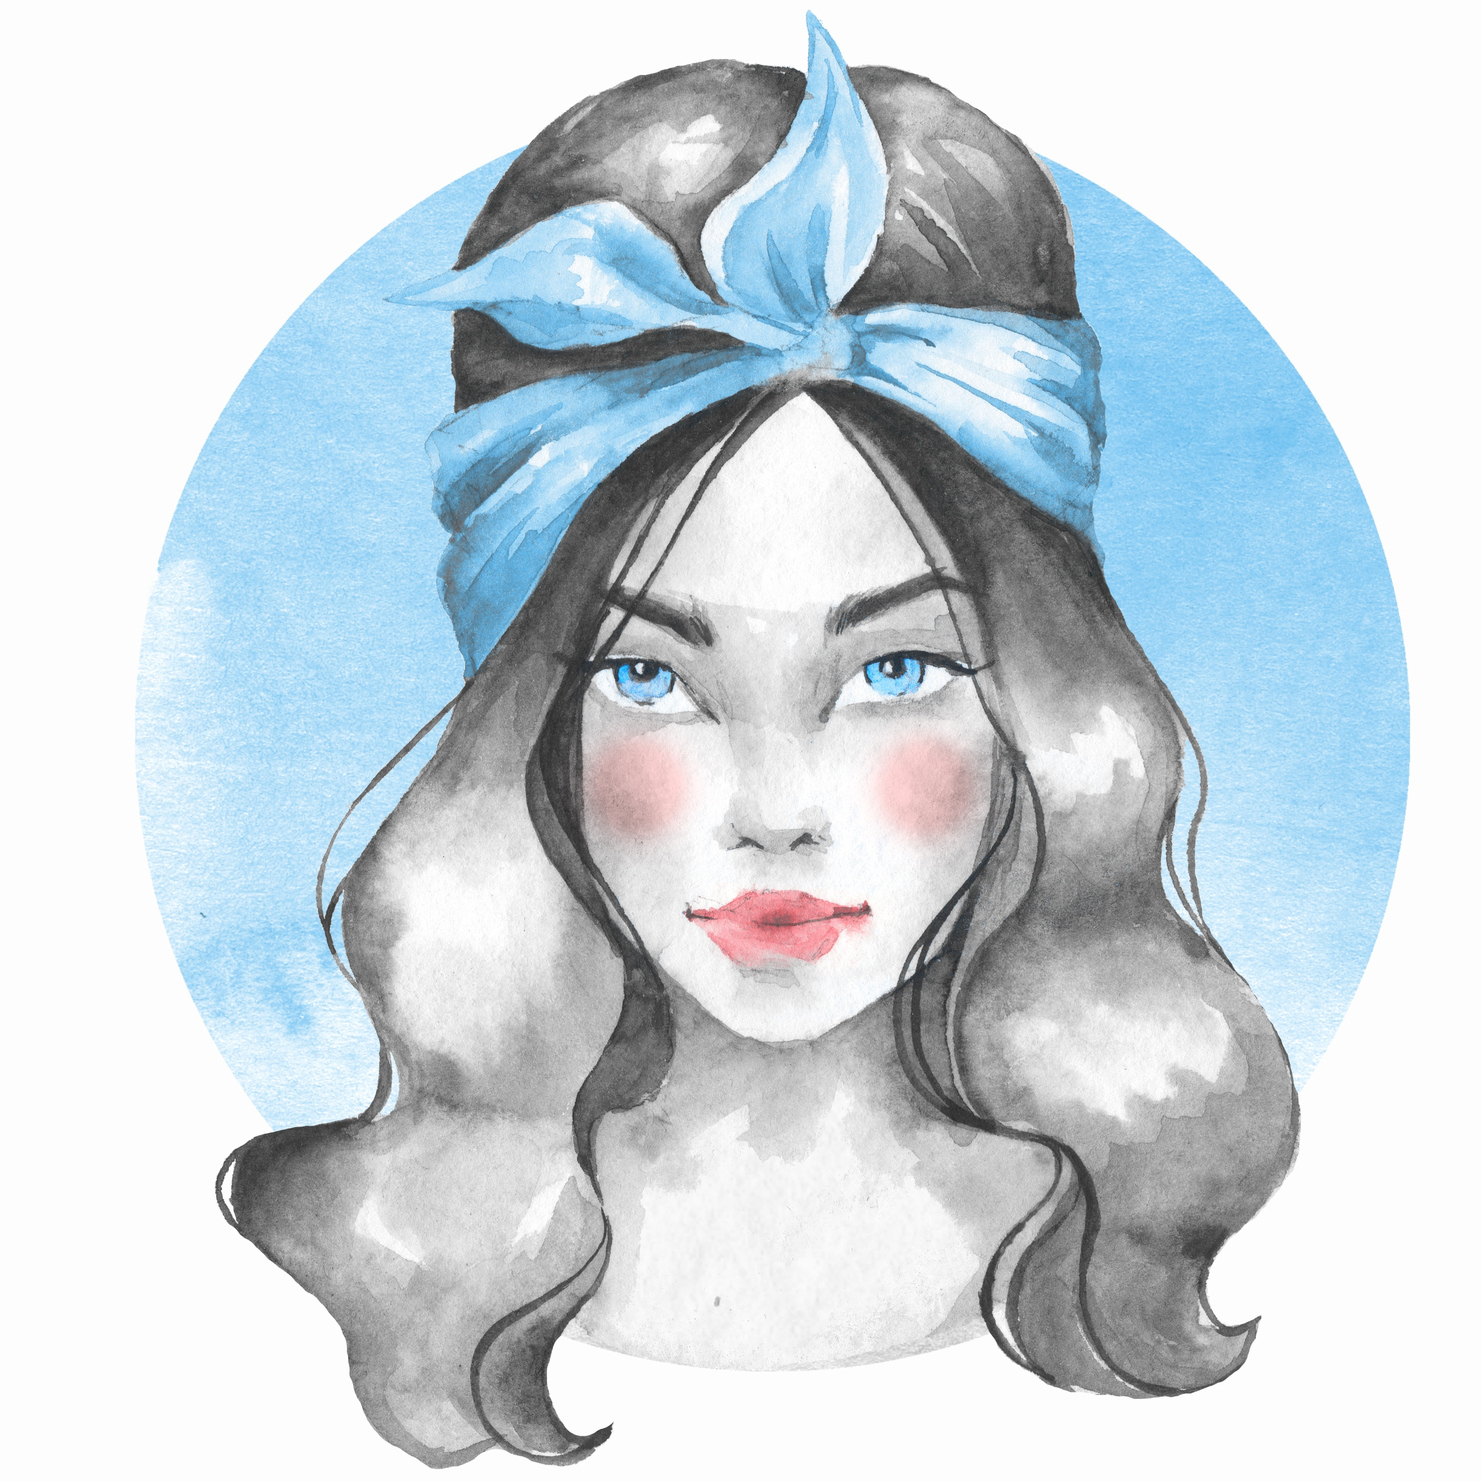 watercolor painting of woman with blue headband